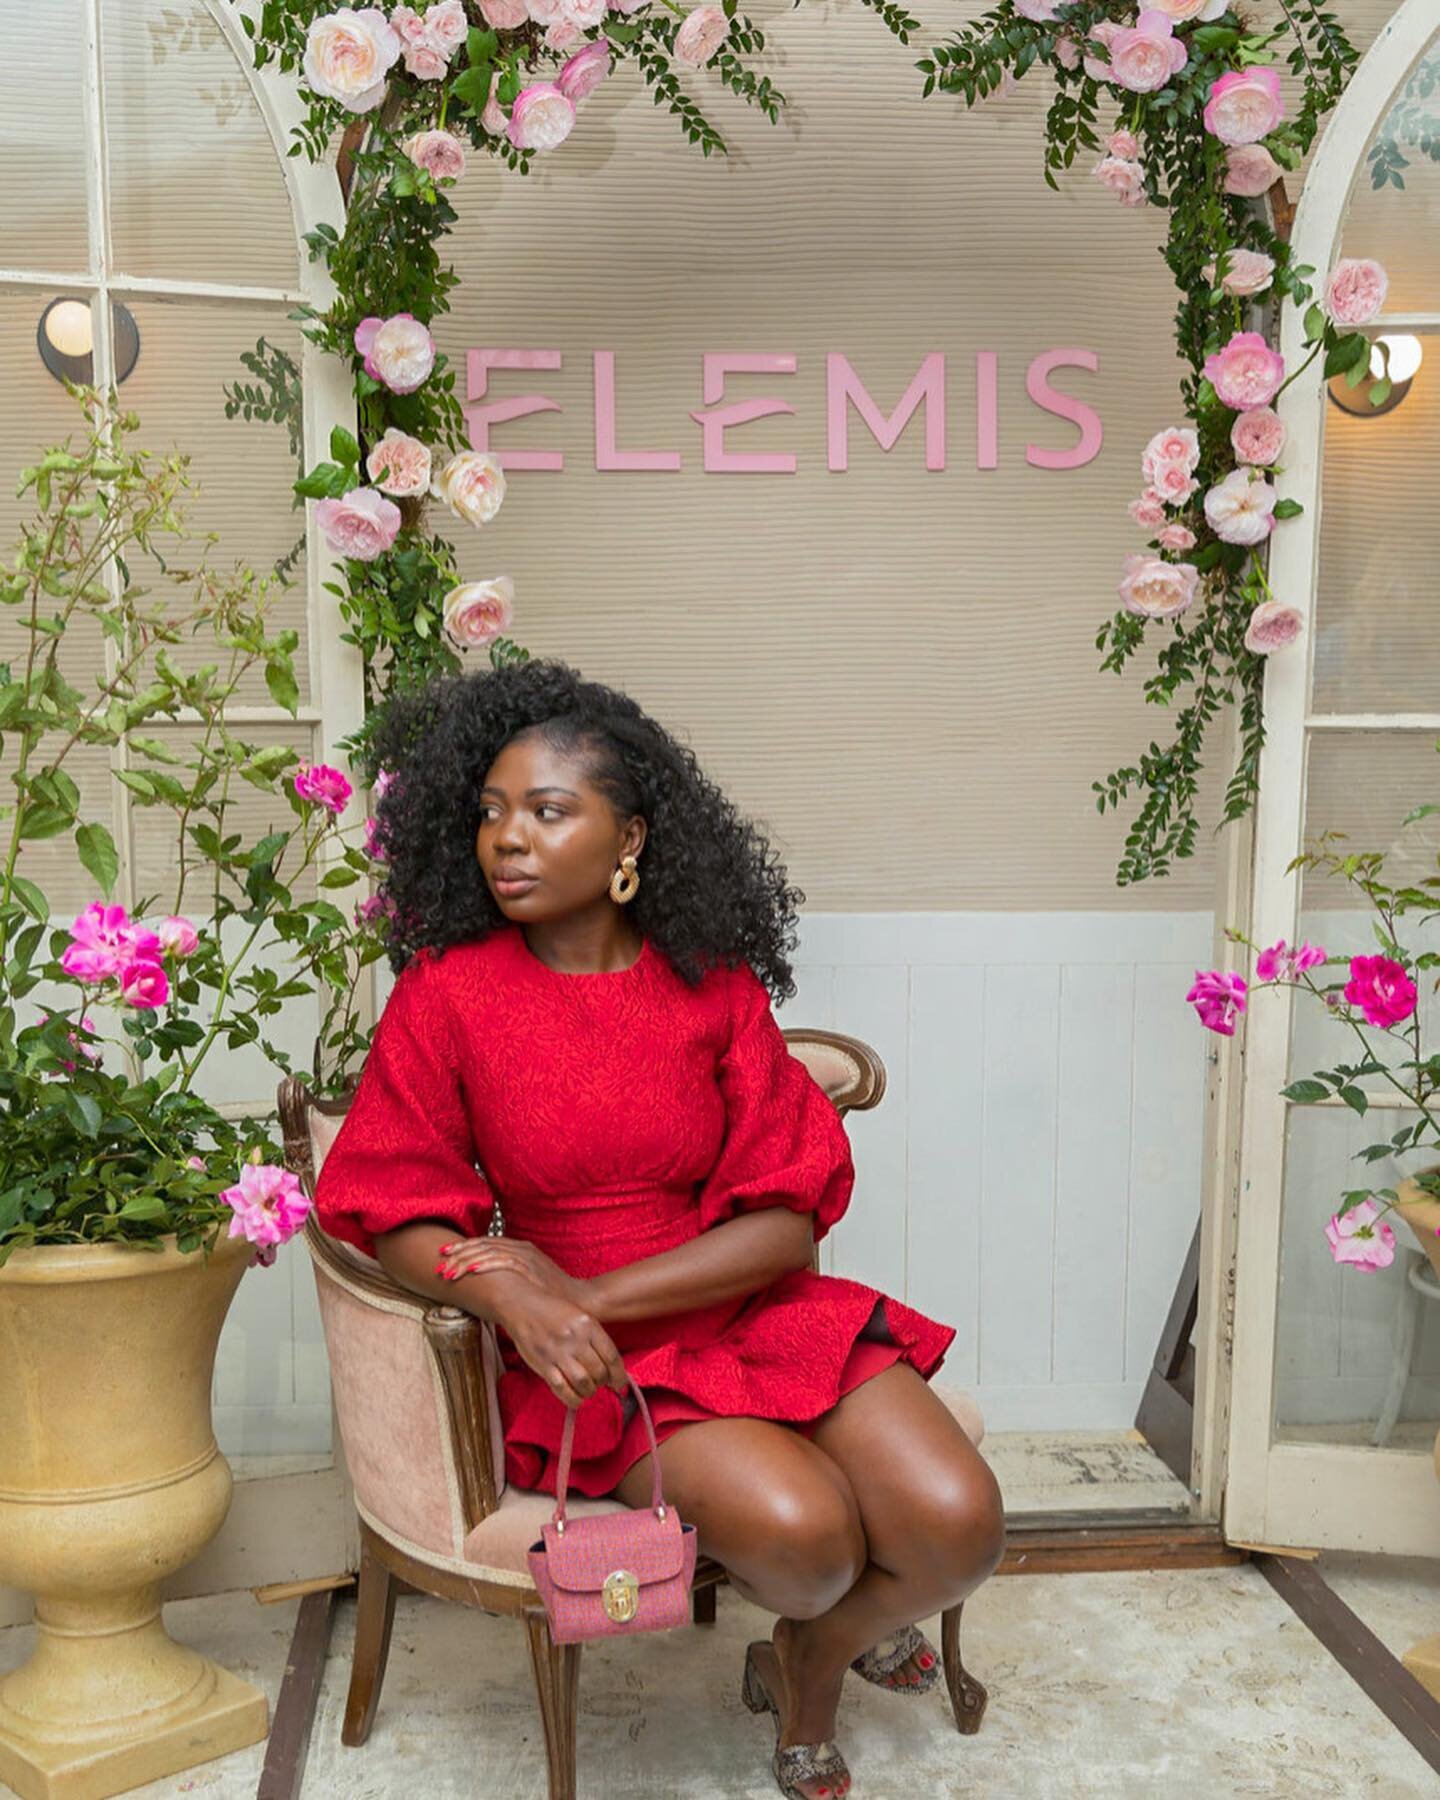 There&rsquo;s no better combo than tasty treats and stunning beauty products. 🤍 We loved executing the cutest breakfast masterclass for @ELEMIS X @KatieJaneHughes! As an ELEMIS glow expert, Katie gave all of the best tips and tricks for perfect glow